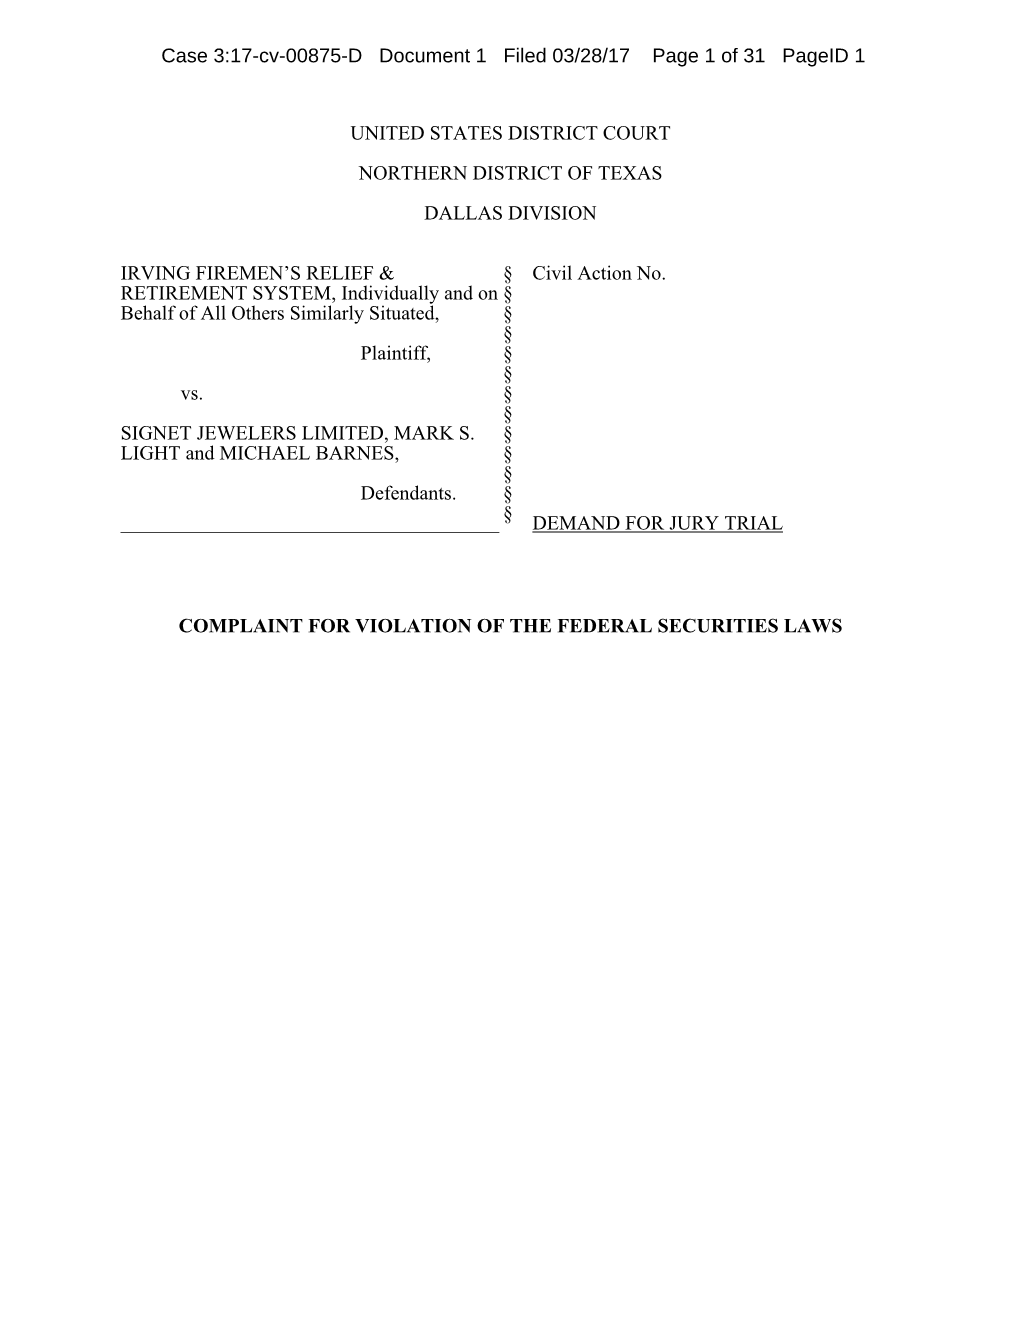 UNITED STATES DISTRICT COURT NORTHERN DISTRICT of TEXAS DALLAS DIVISION IRVING FIREMEN's RELIEF & RETIREMENT SYSTEM, Indiv